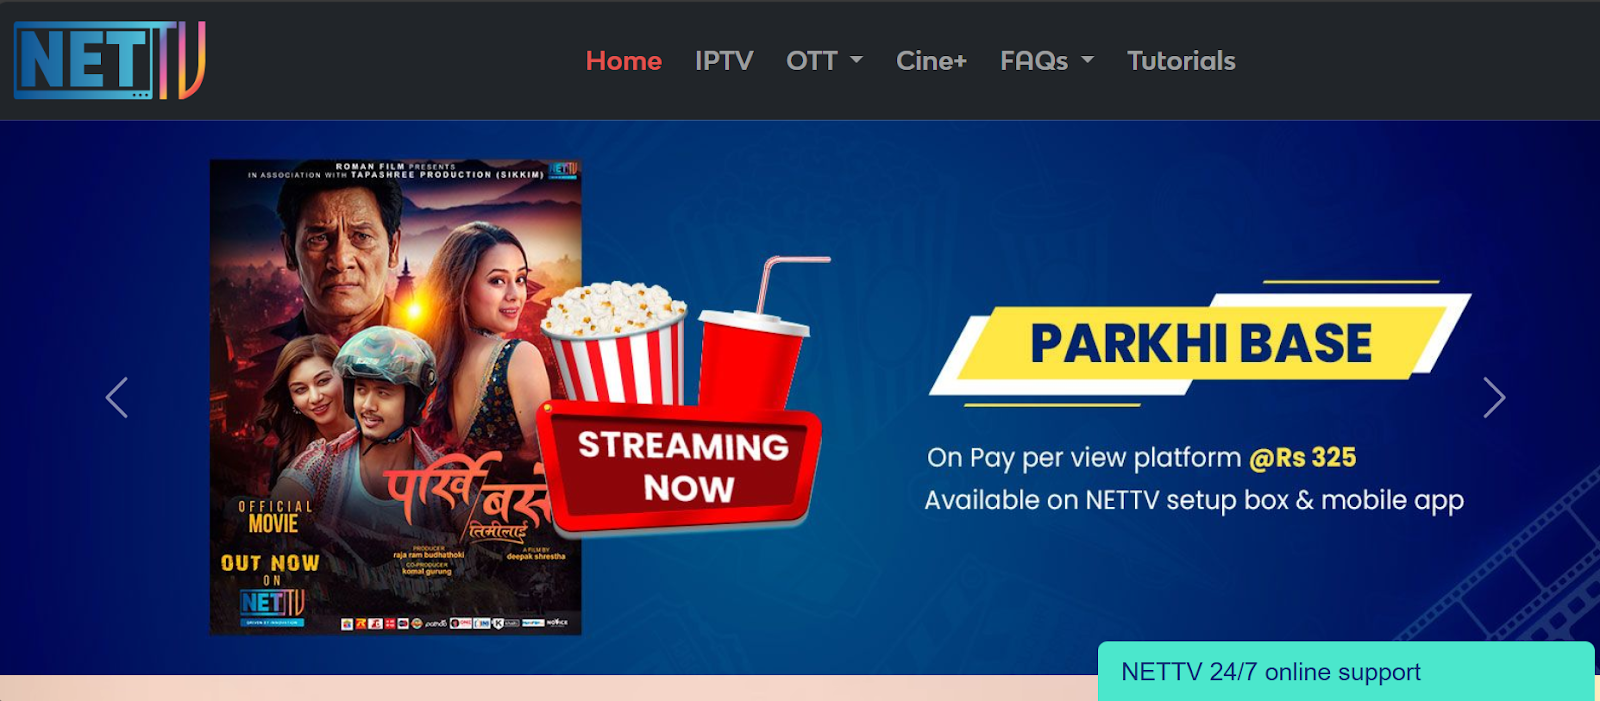 NETTV website snapshot highlighting the services it offers.